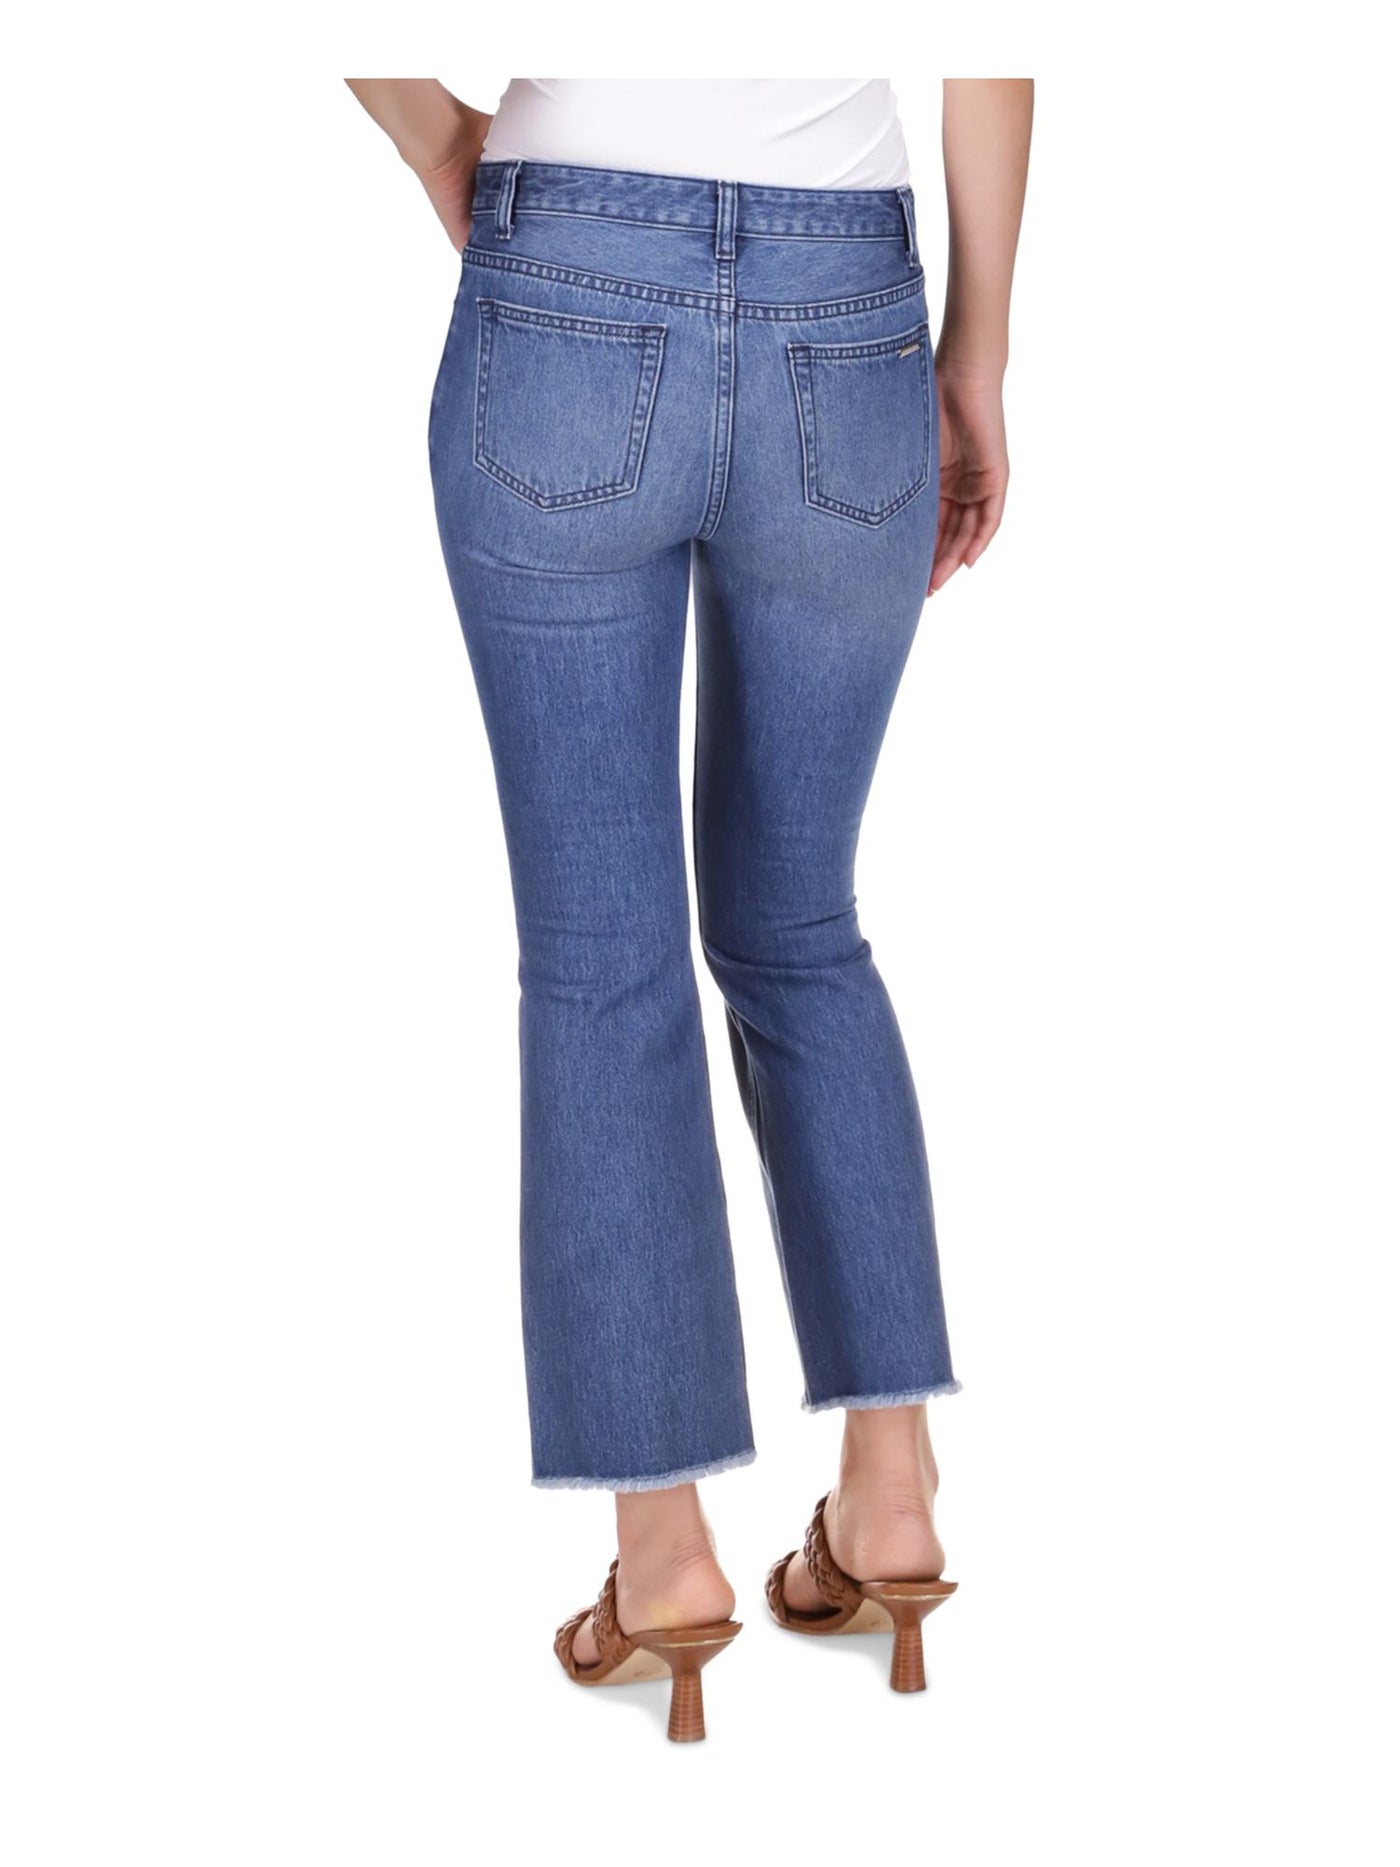 MICHAEL KORS Womens Blue Pocketed Button Fly Raw Hem Cropped Jeans Petites 10P